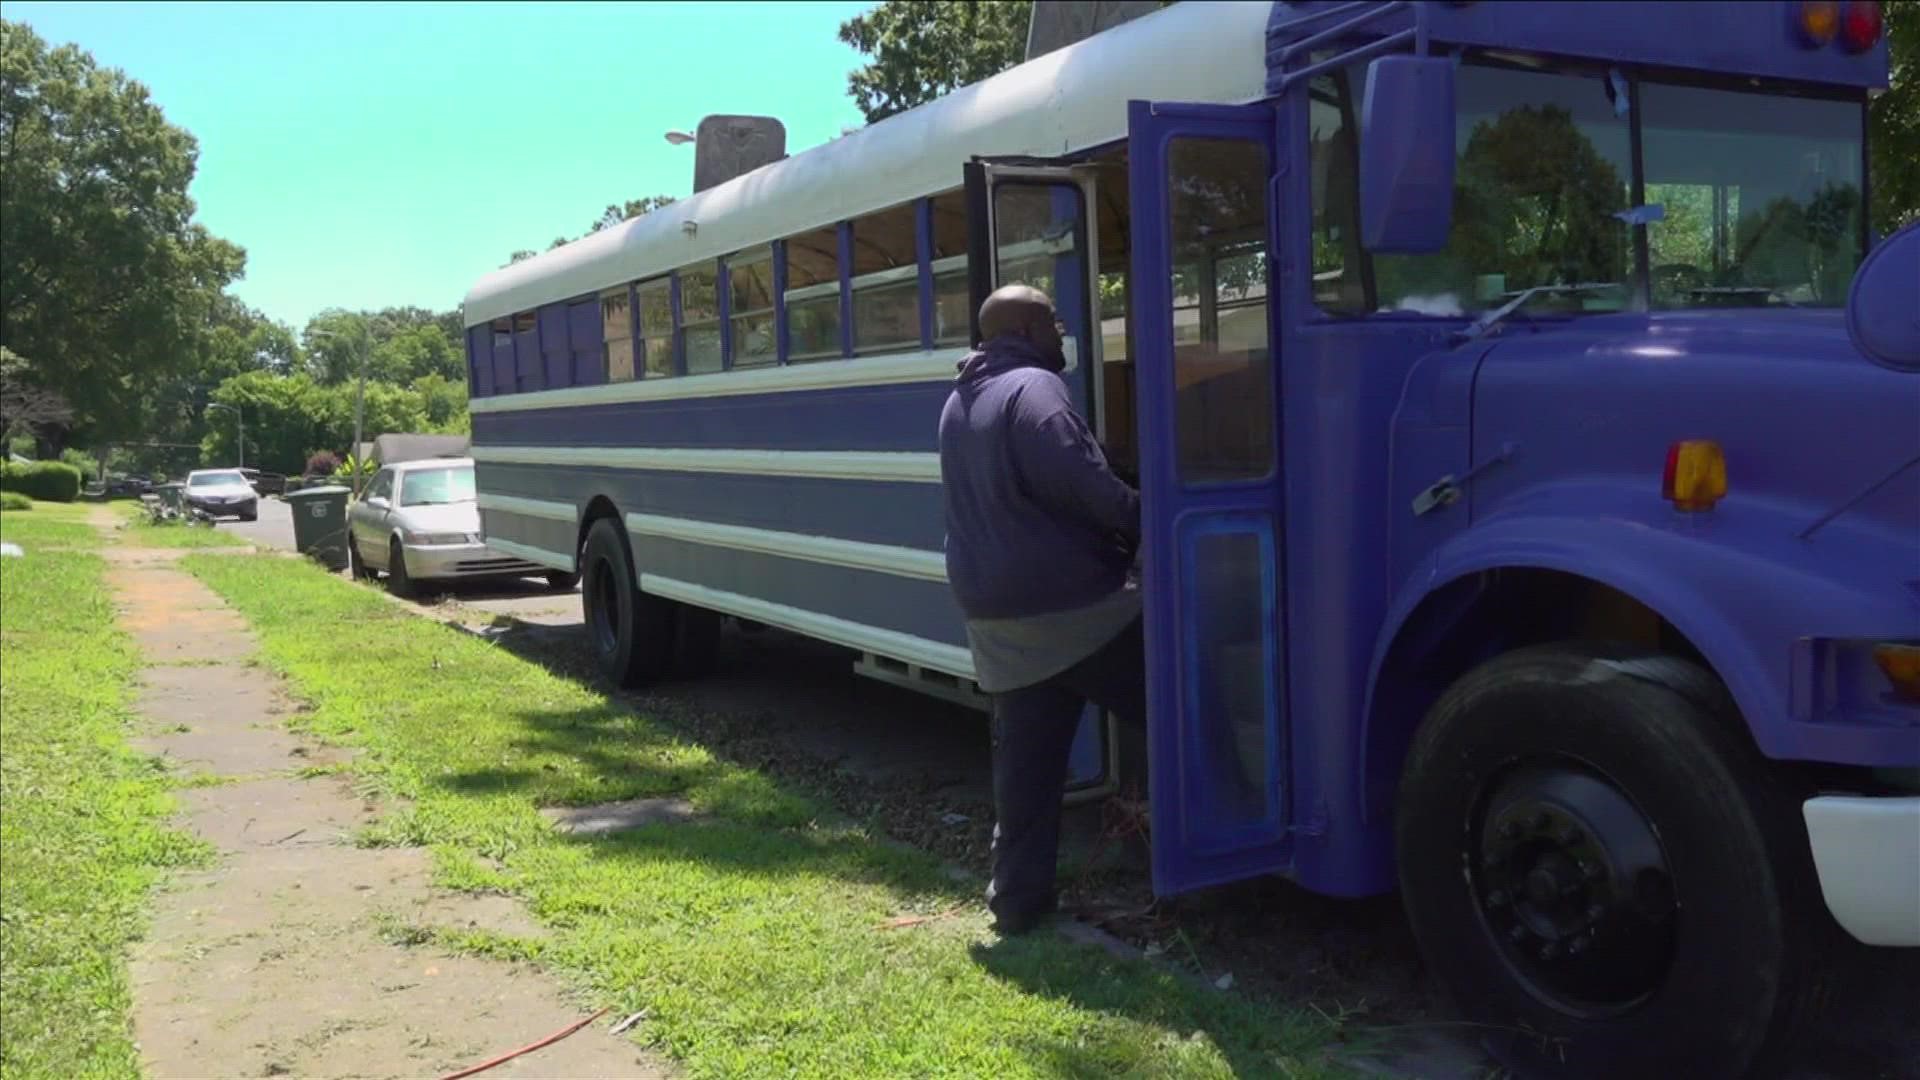 With the housing crisis in full effect in Memphis, one couple decided to cut costs by living in a "schoolie," a school bus converted into an RV.